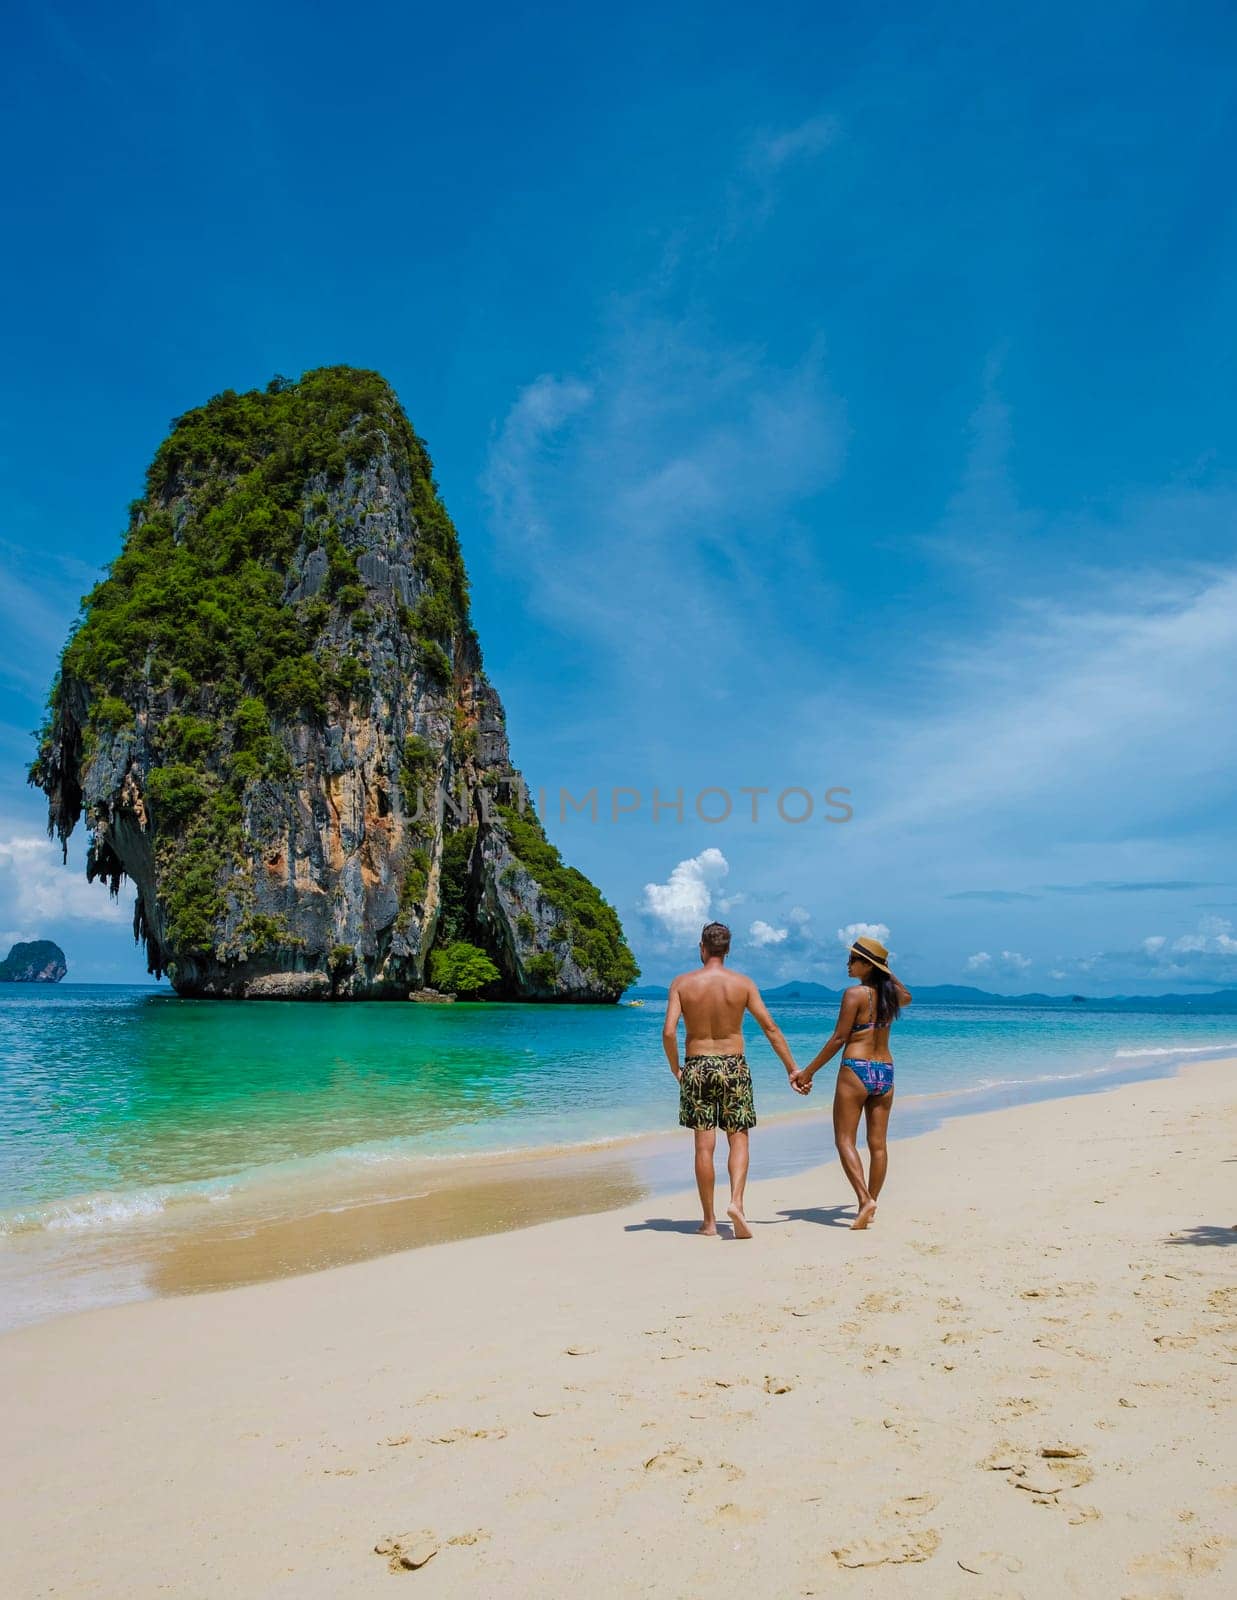 Railay Beach Krabi Thailand, the tropical beach of Railay Krabi, a couple of men and woman on the beach, Panoramic view of idyllic Railay Beach in Thailand with a traditional long boat.